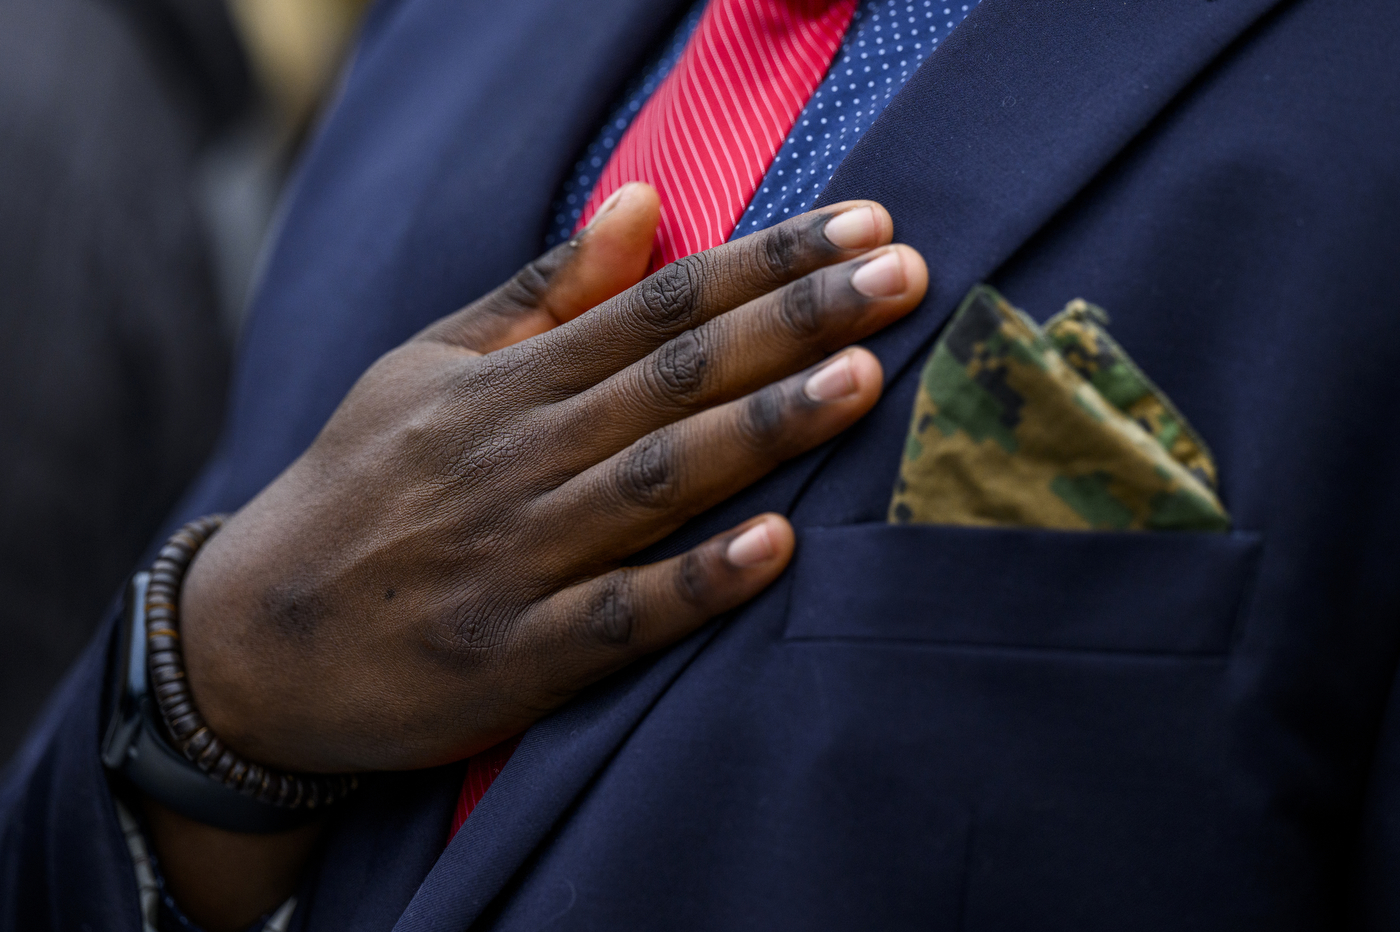 Person holding their hand over their heart at the Veterans Day ceremony.